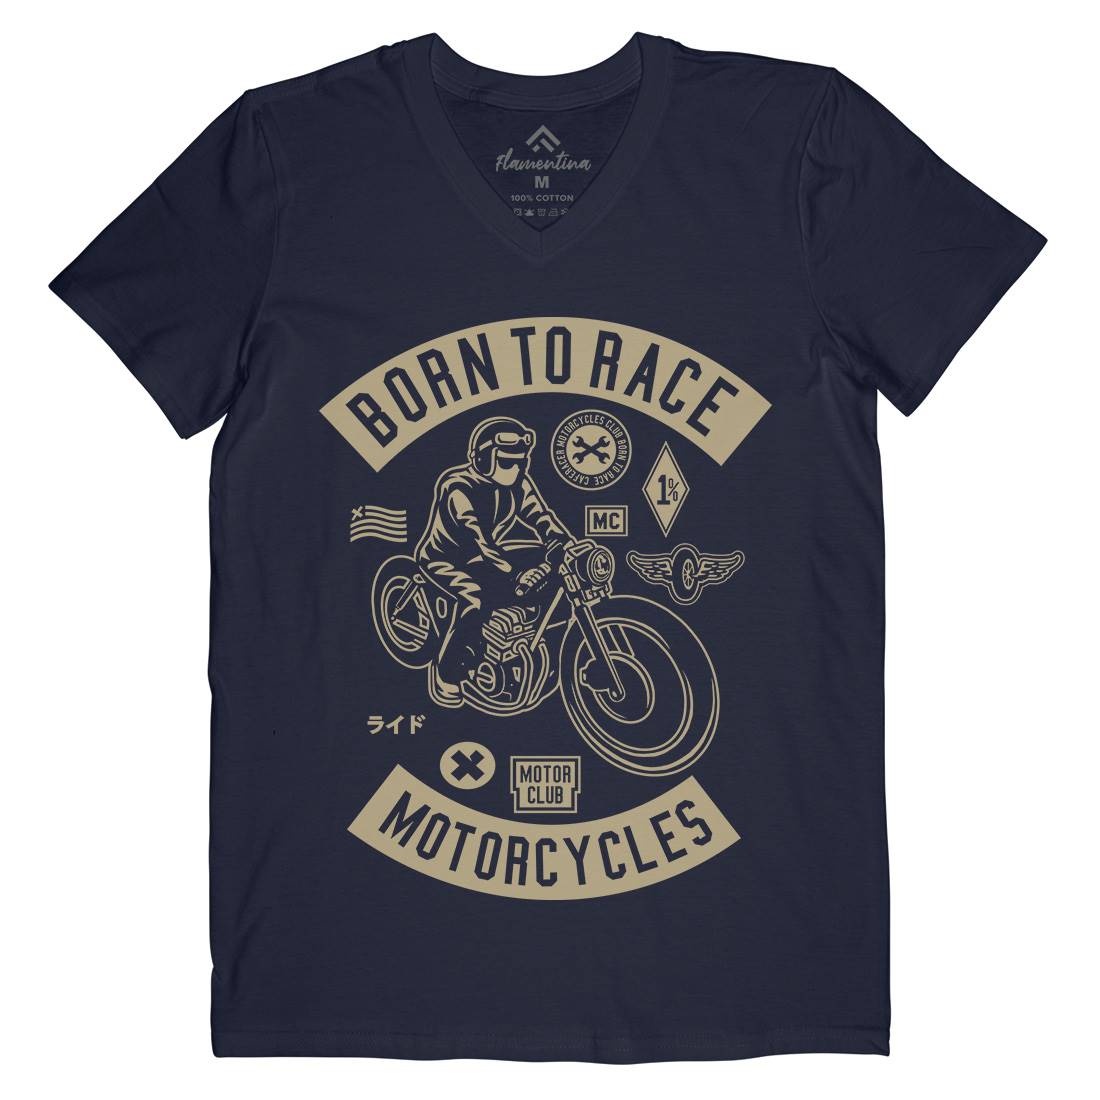 Born To Race Mens V-Neck T-Shirt Motorcycles A210